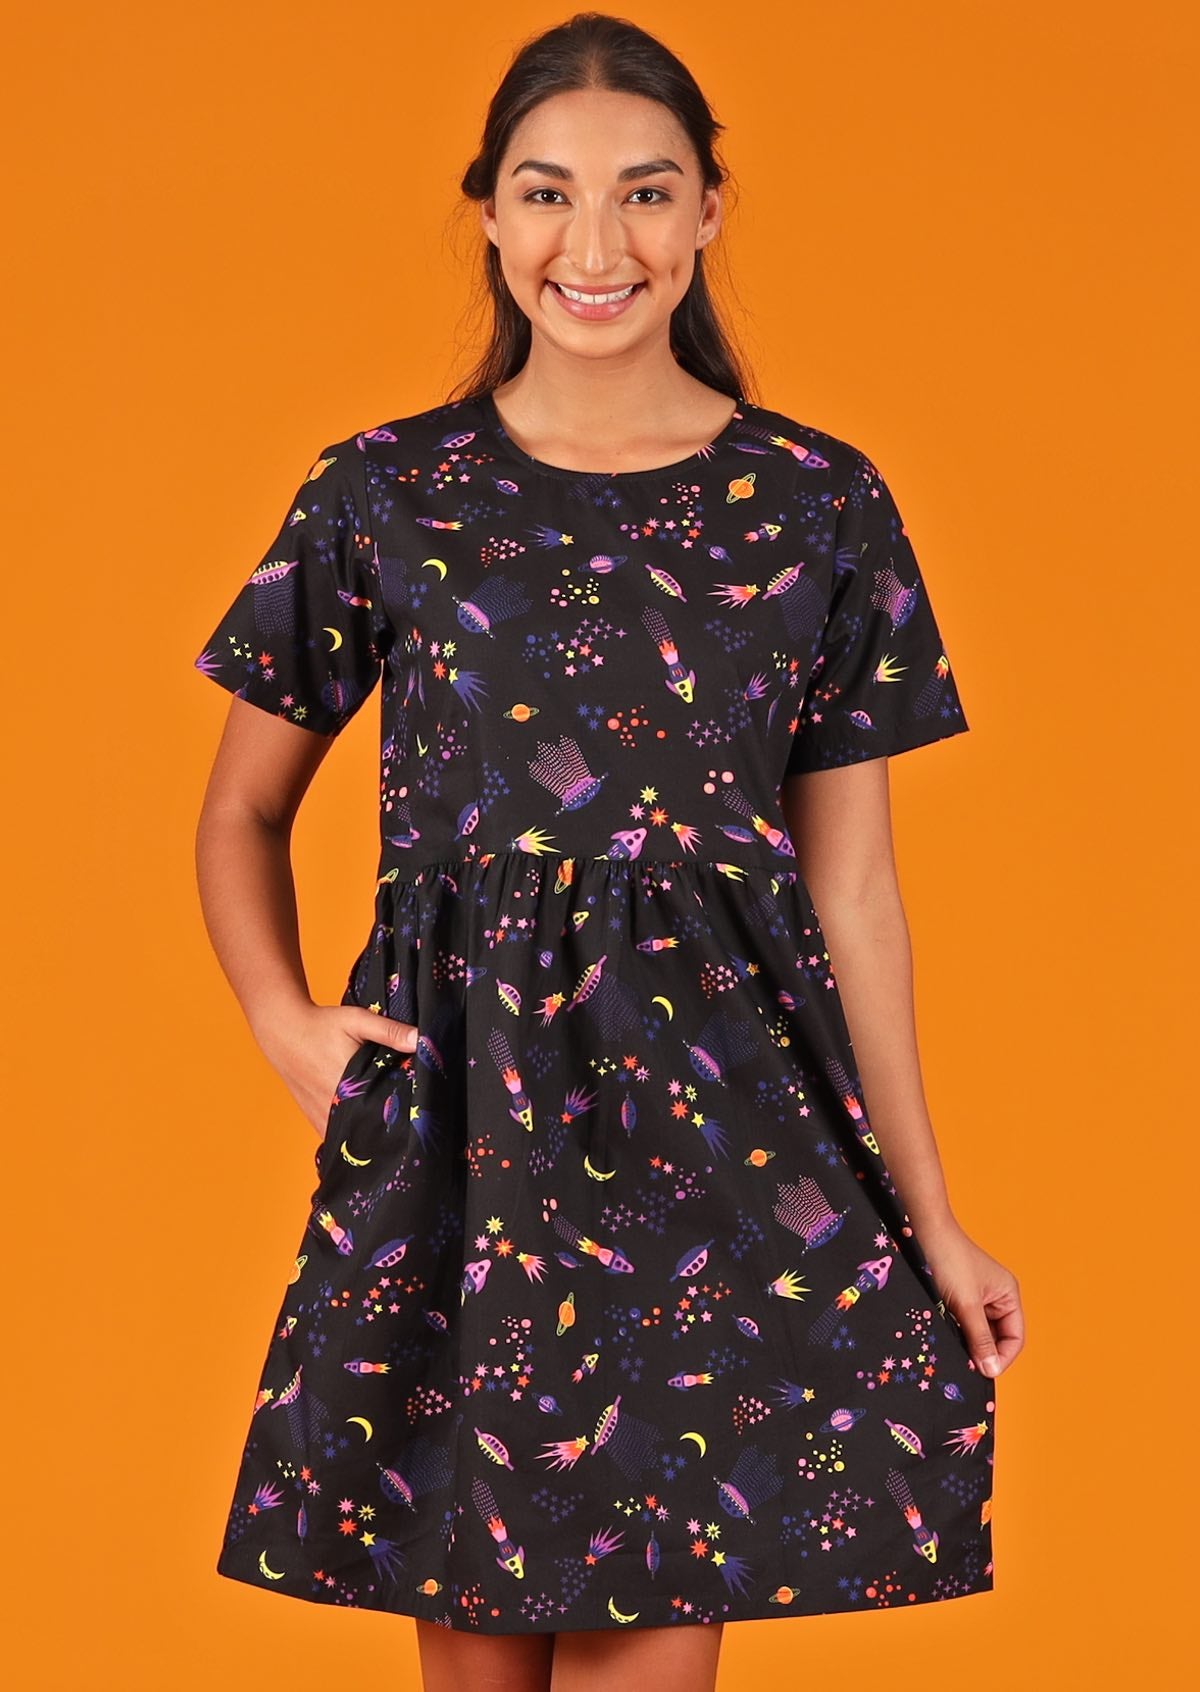 Model is mabel Dress Astro 100% cotton space print on black background relaxed fit above knee dress with hidden pockets 